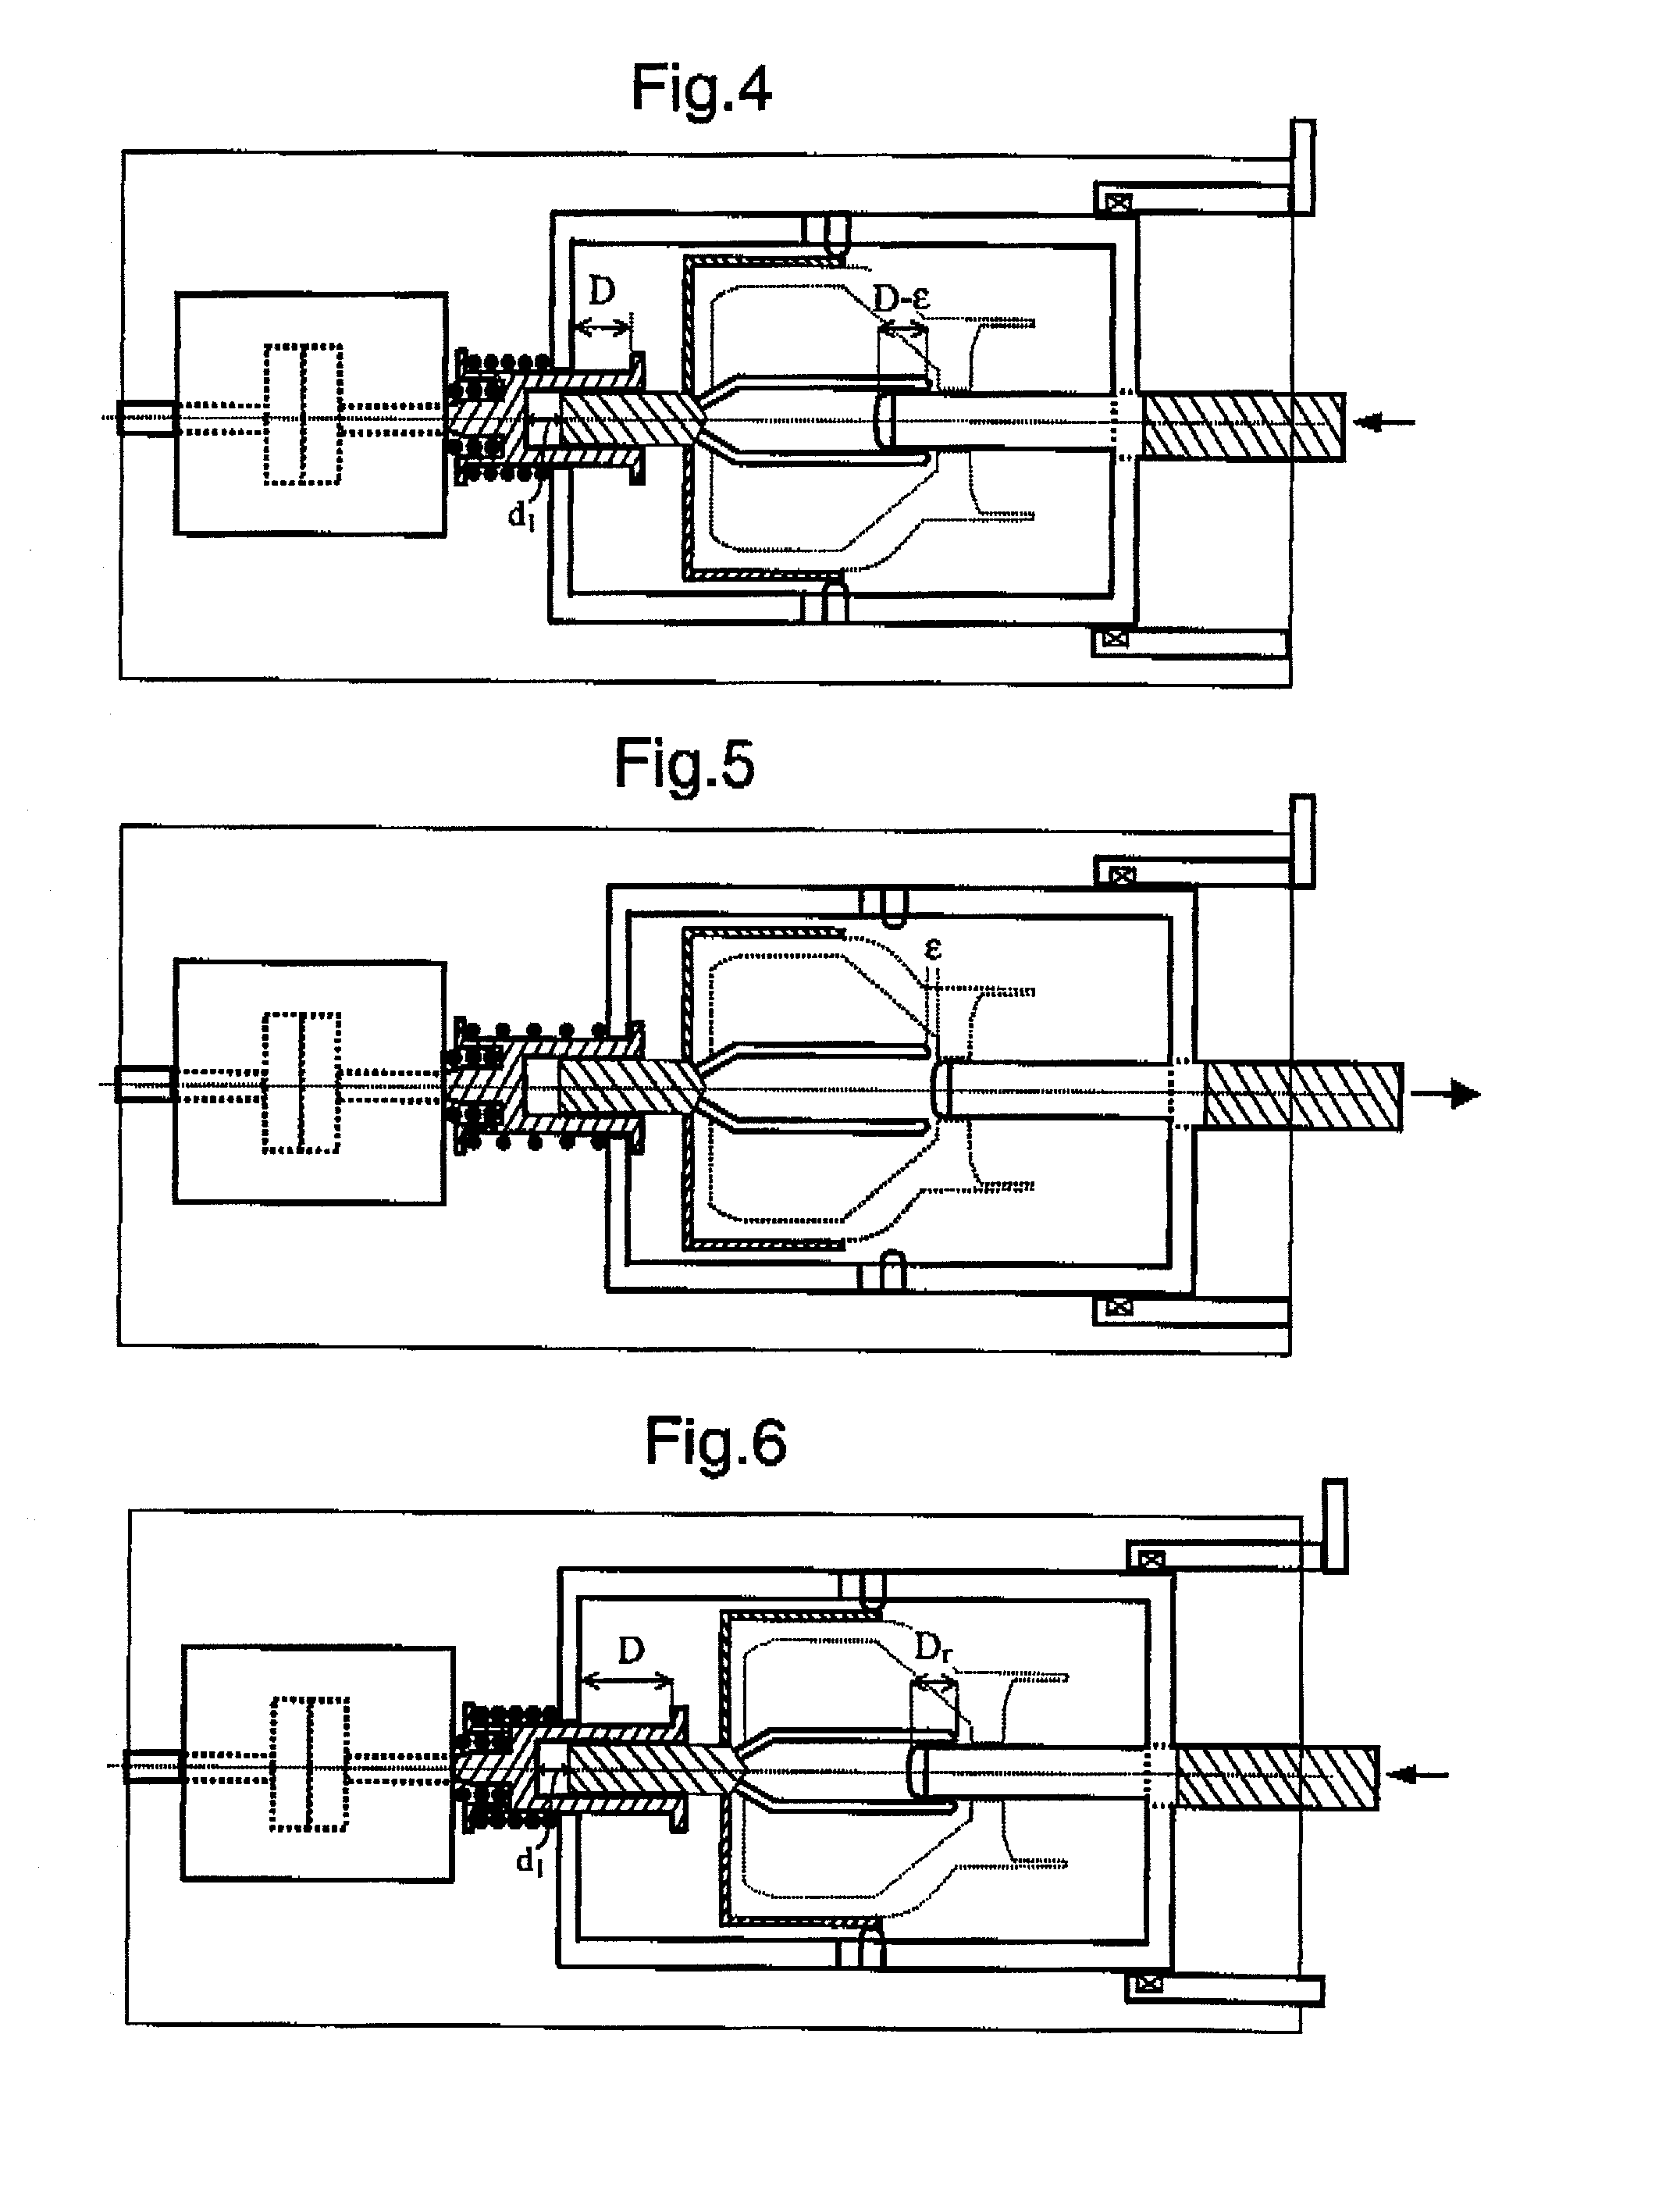 High-voltage interrupter device having combined vacuum and gas interruption